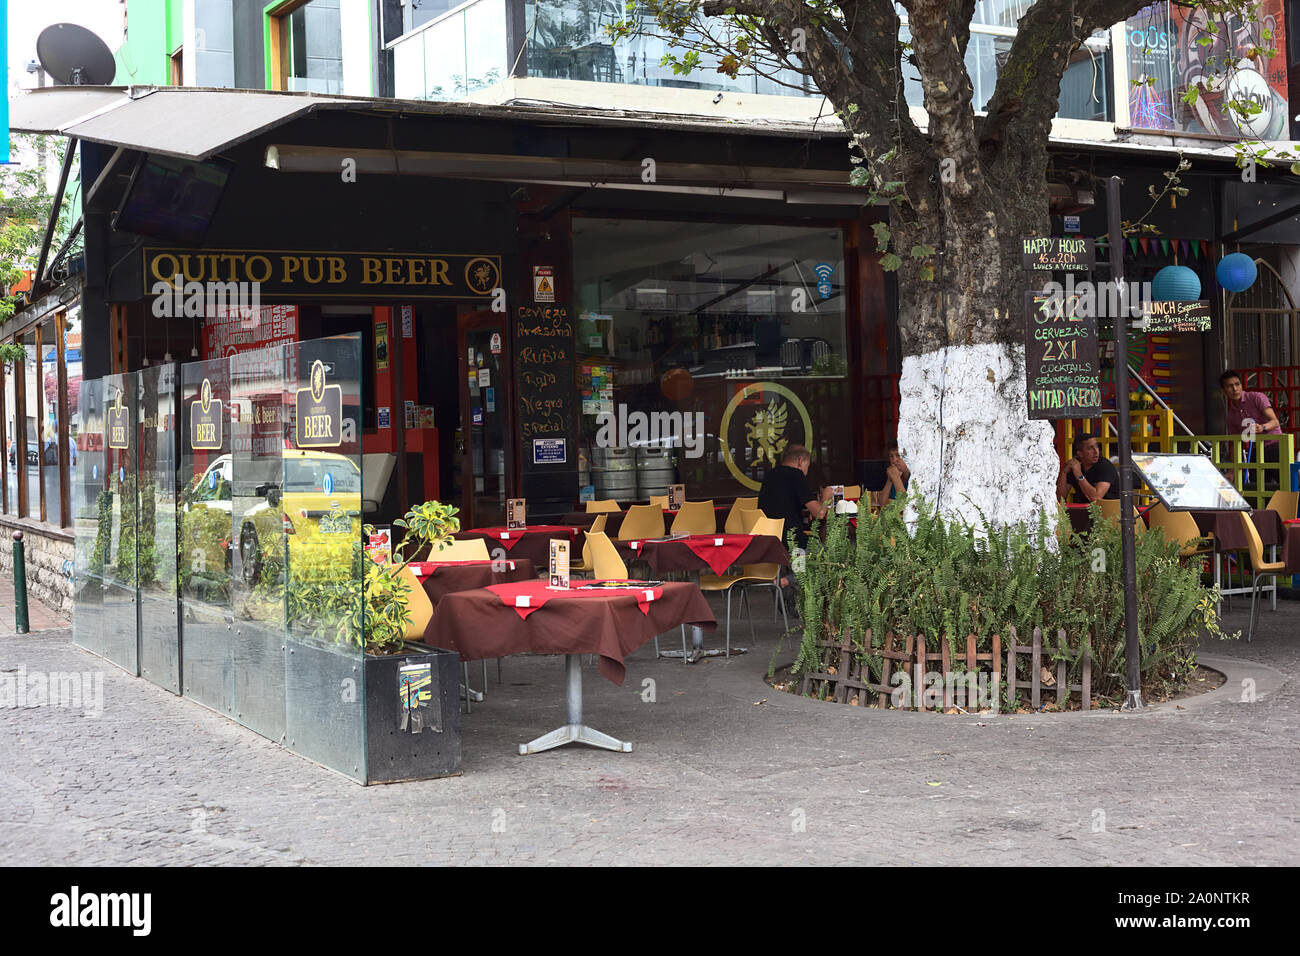 QUITO, ECUADOR - AUGUST 6, 2014: Unidentified people sitting at outdoor tables of the Quito Pub Beer on Plaza Foch in the tourist district La Mariscal Stock Photo